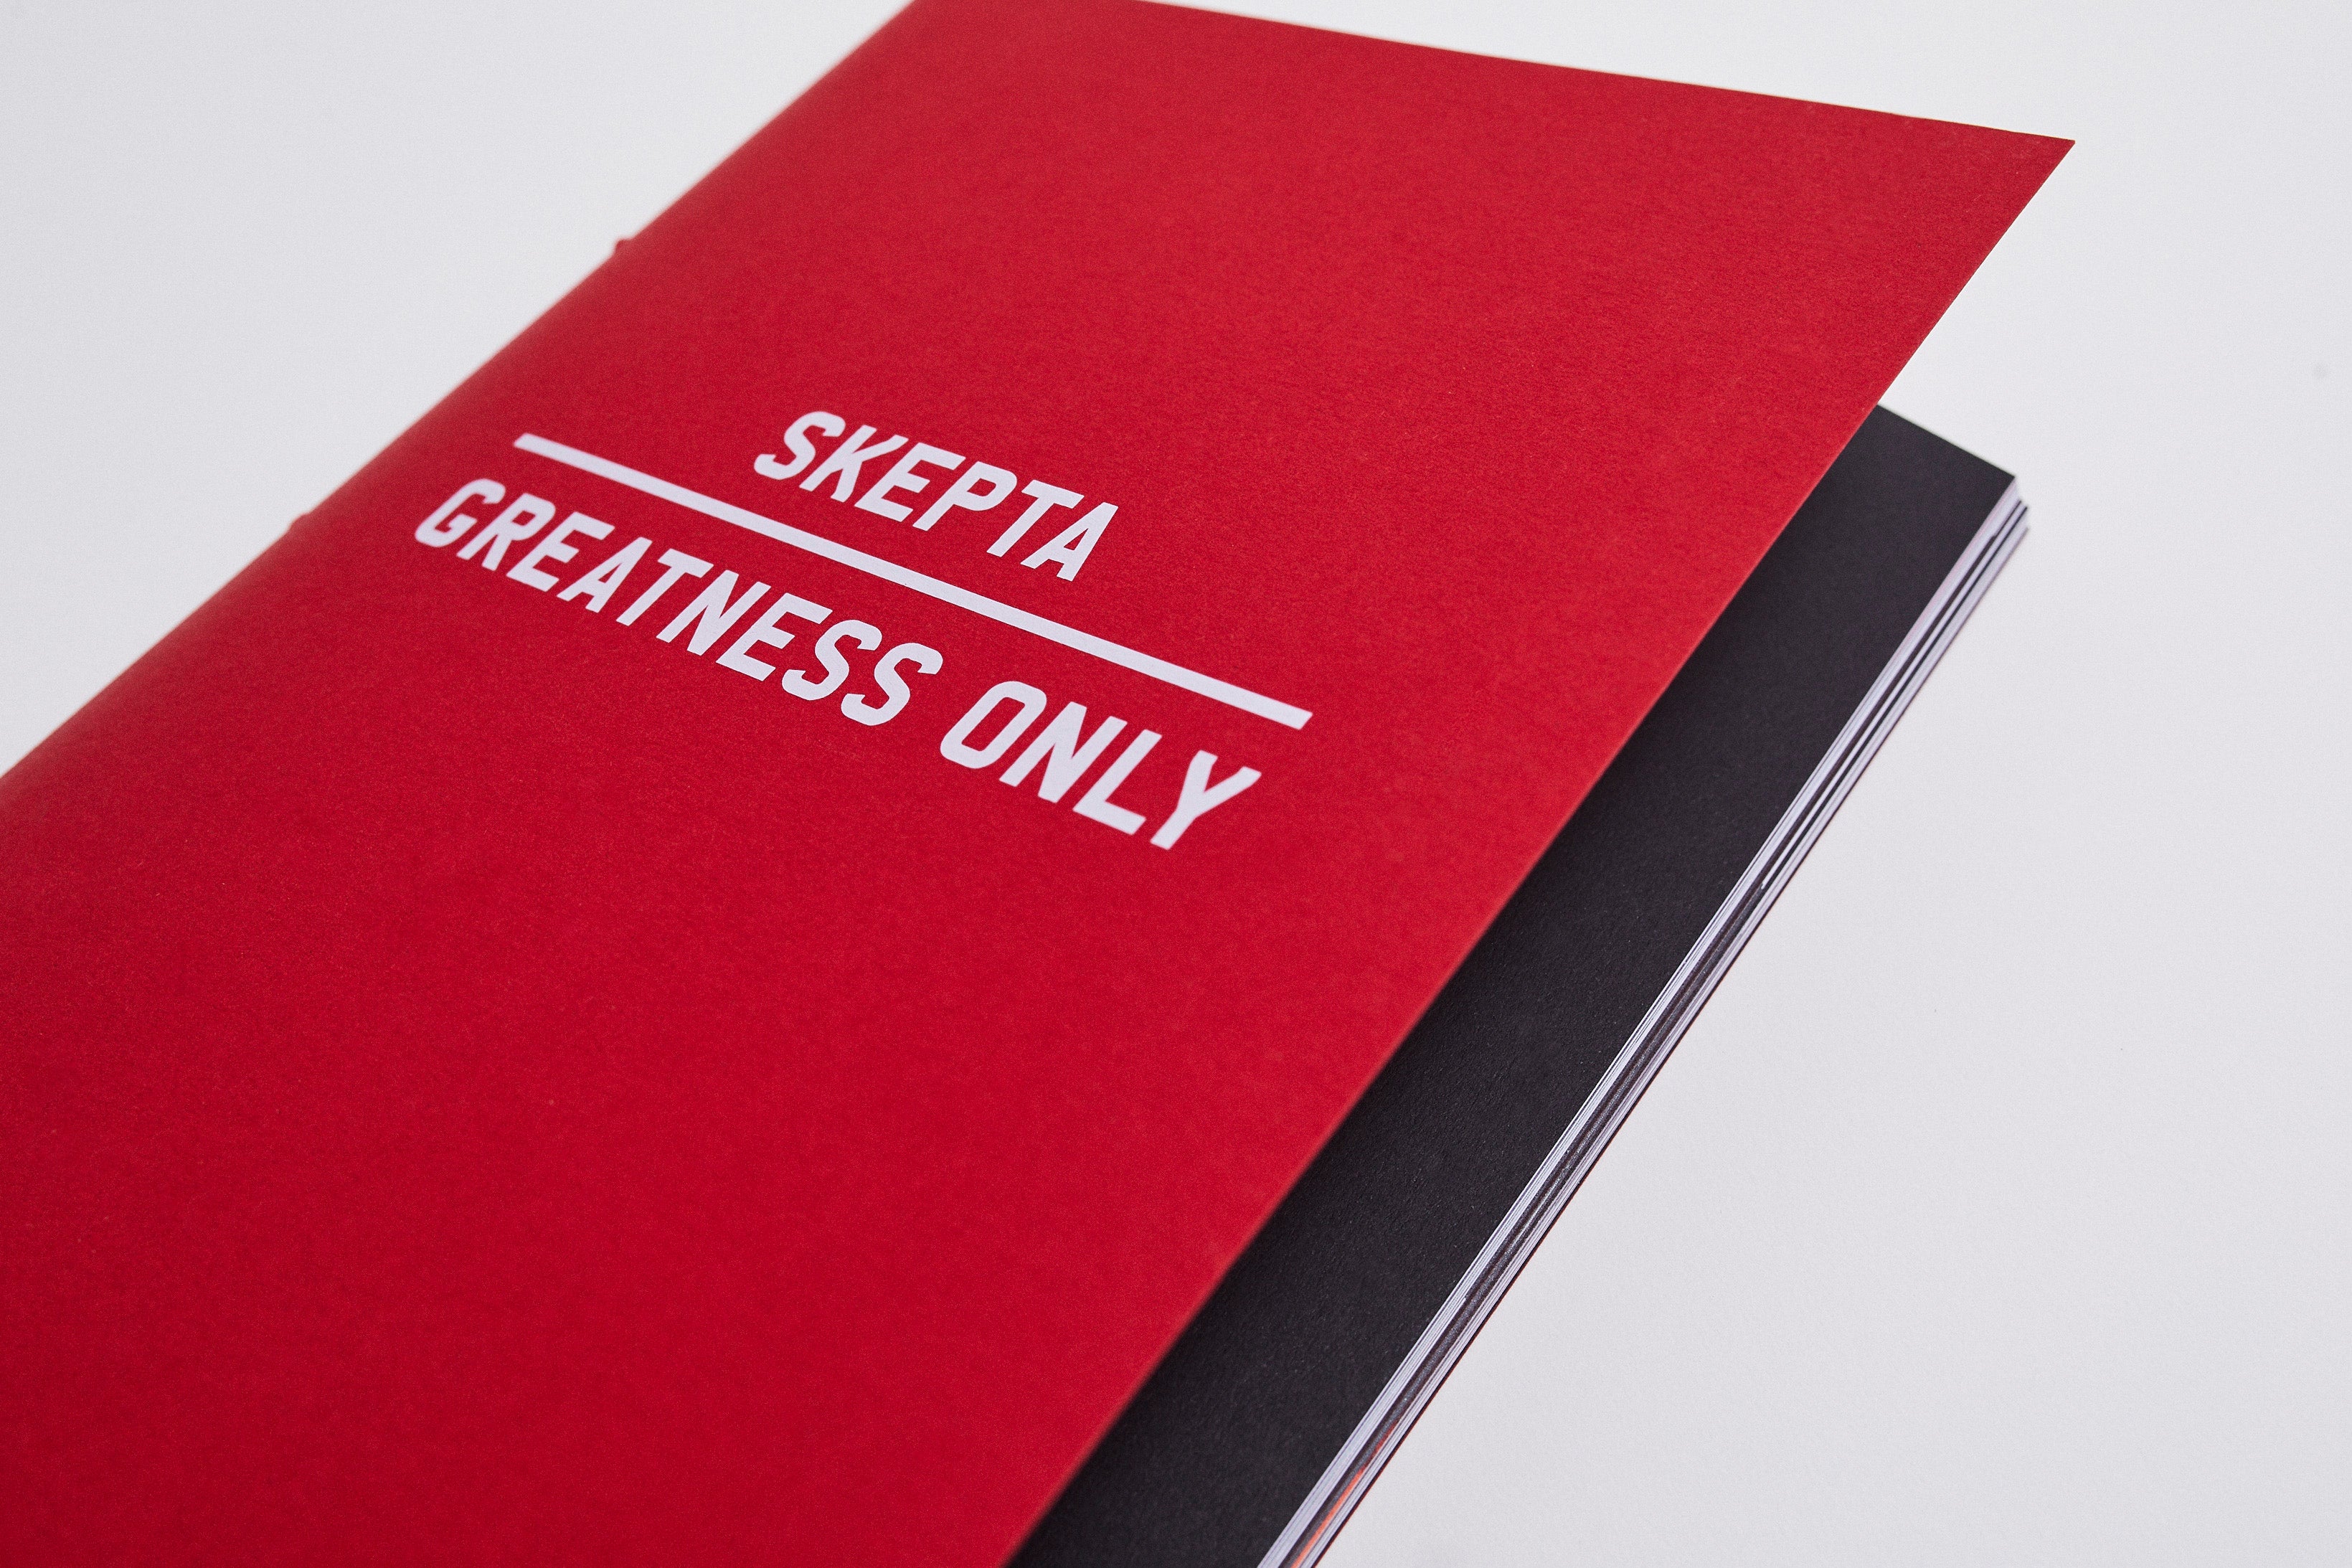 SOLD OUT - Skepta: Greatest Only - photobook